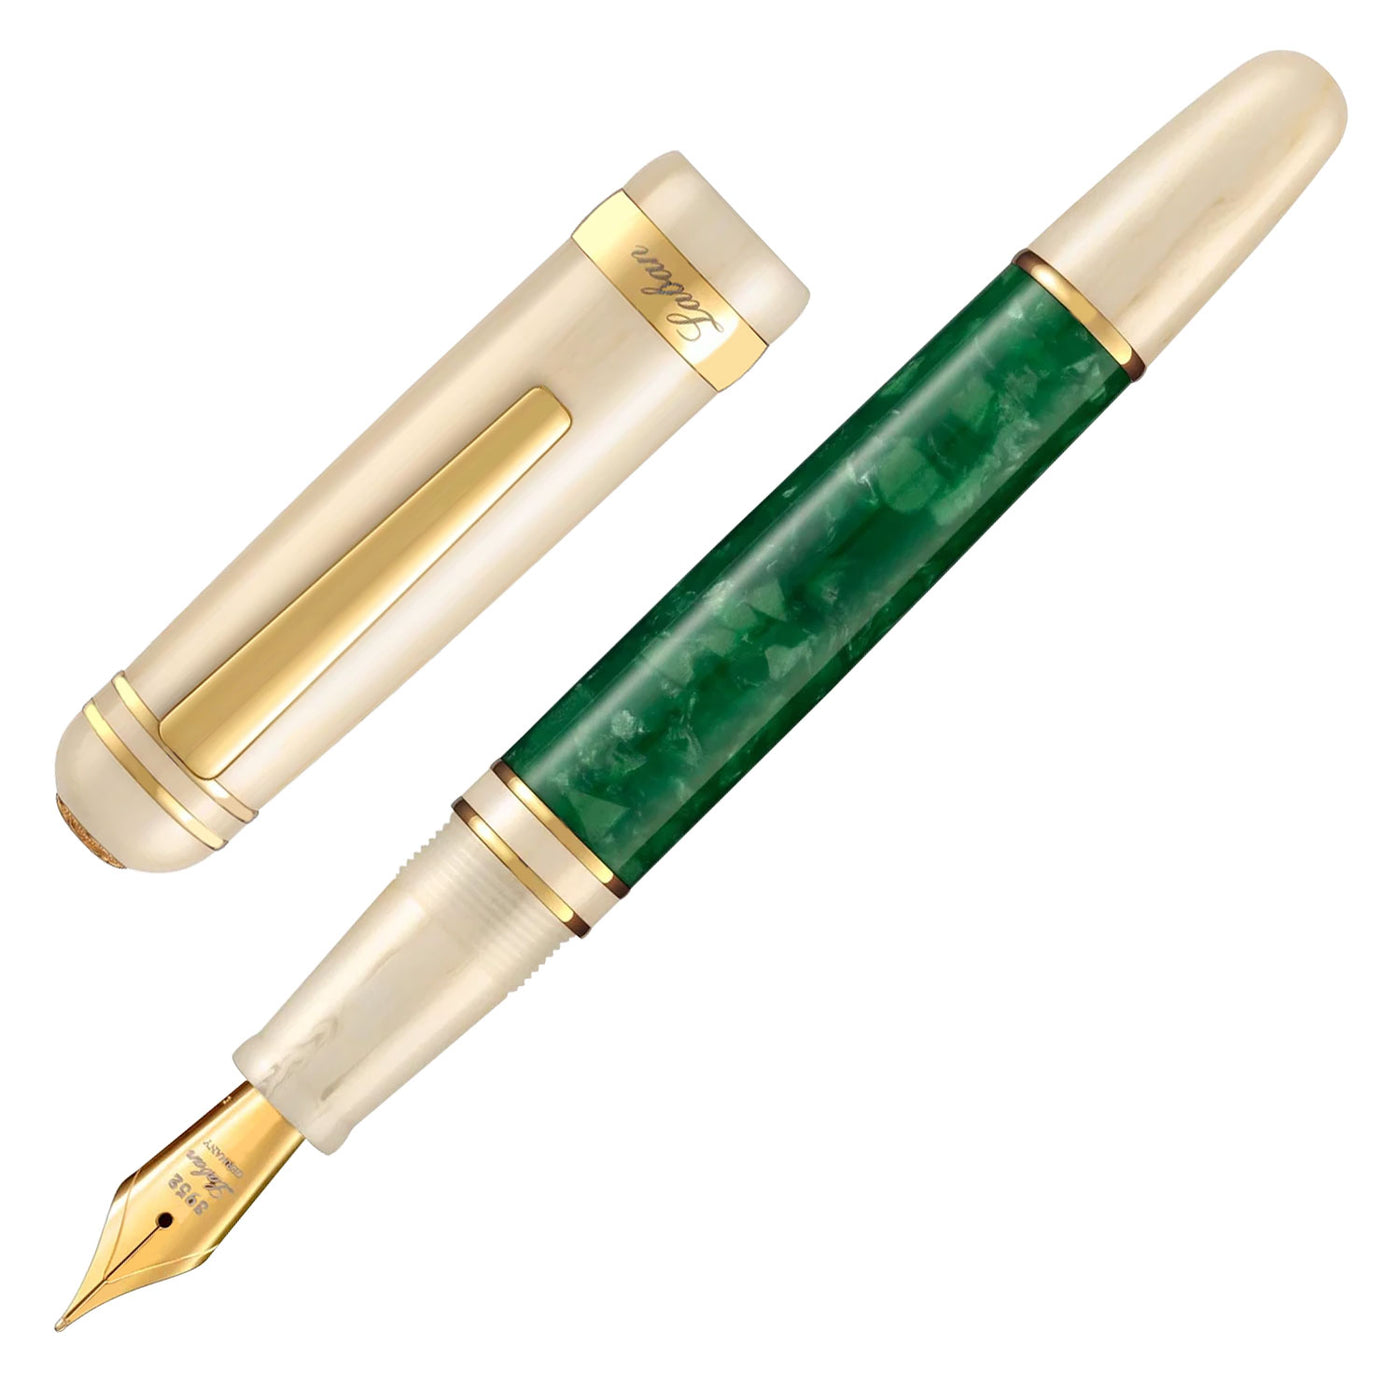 Laban 325 Fountain Pen - Forest